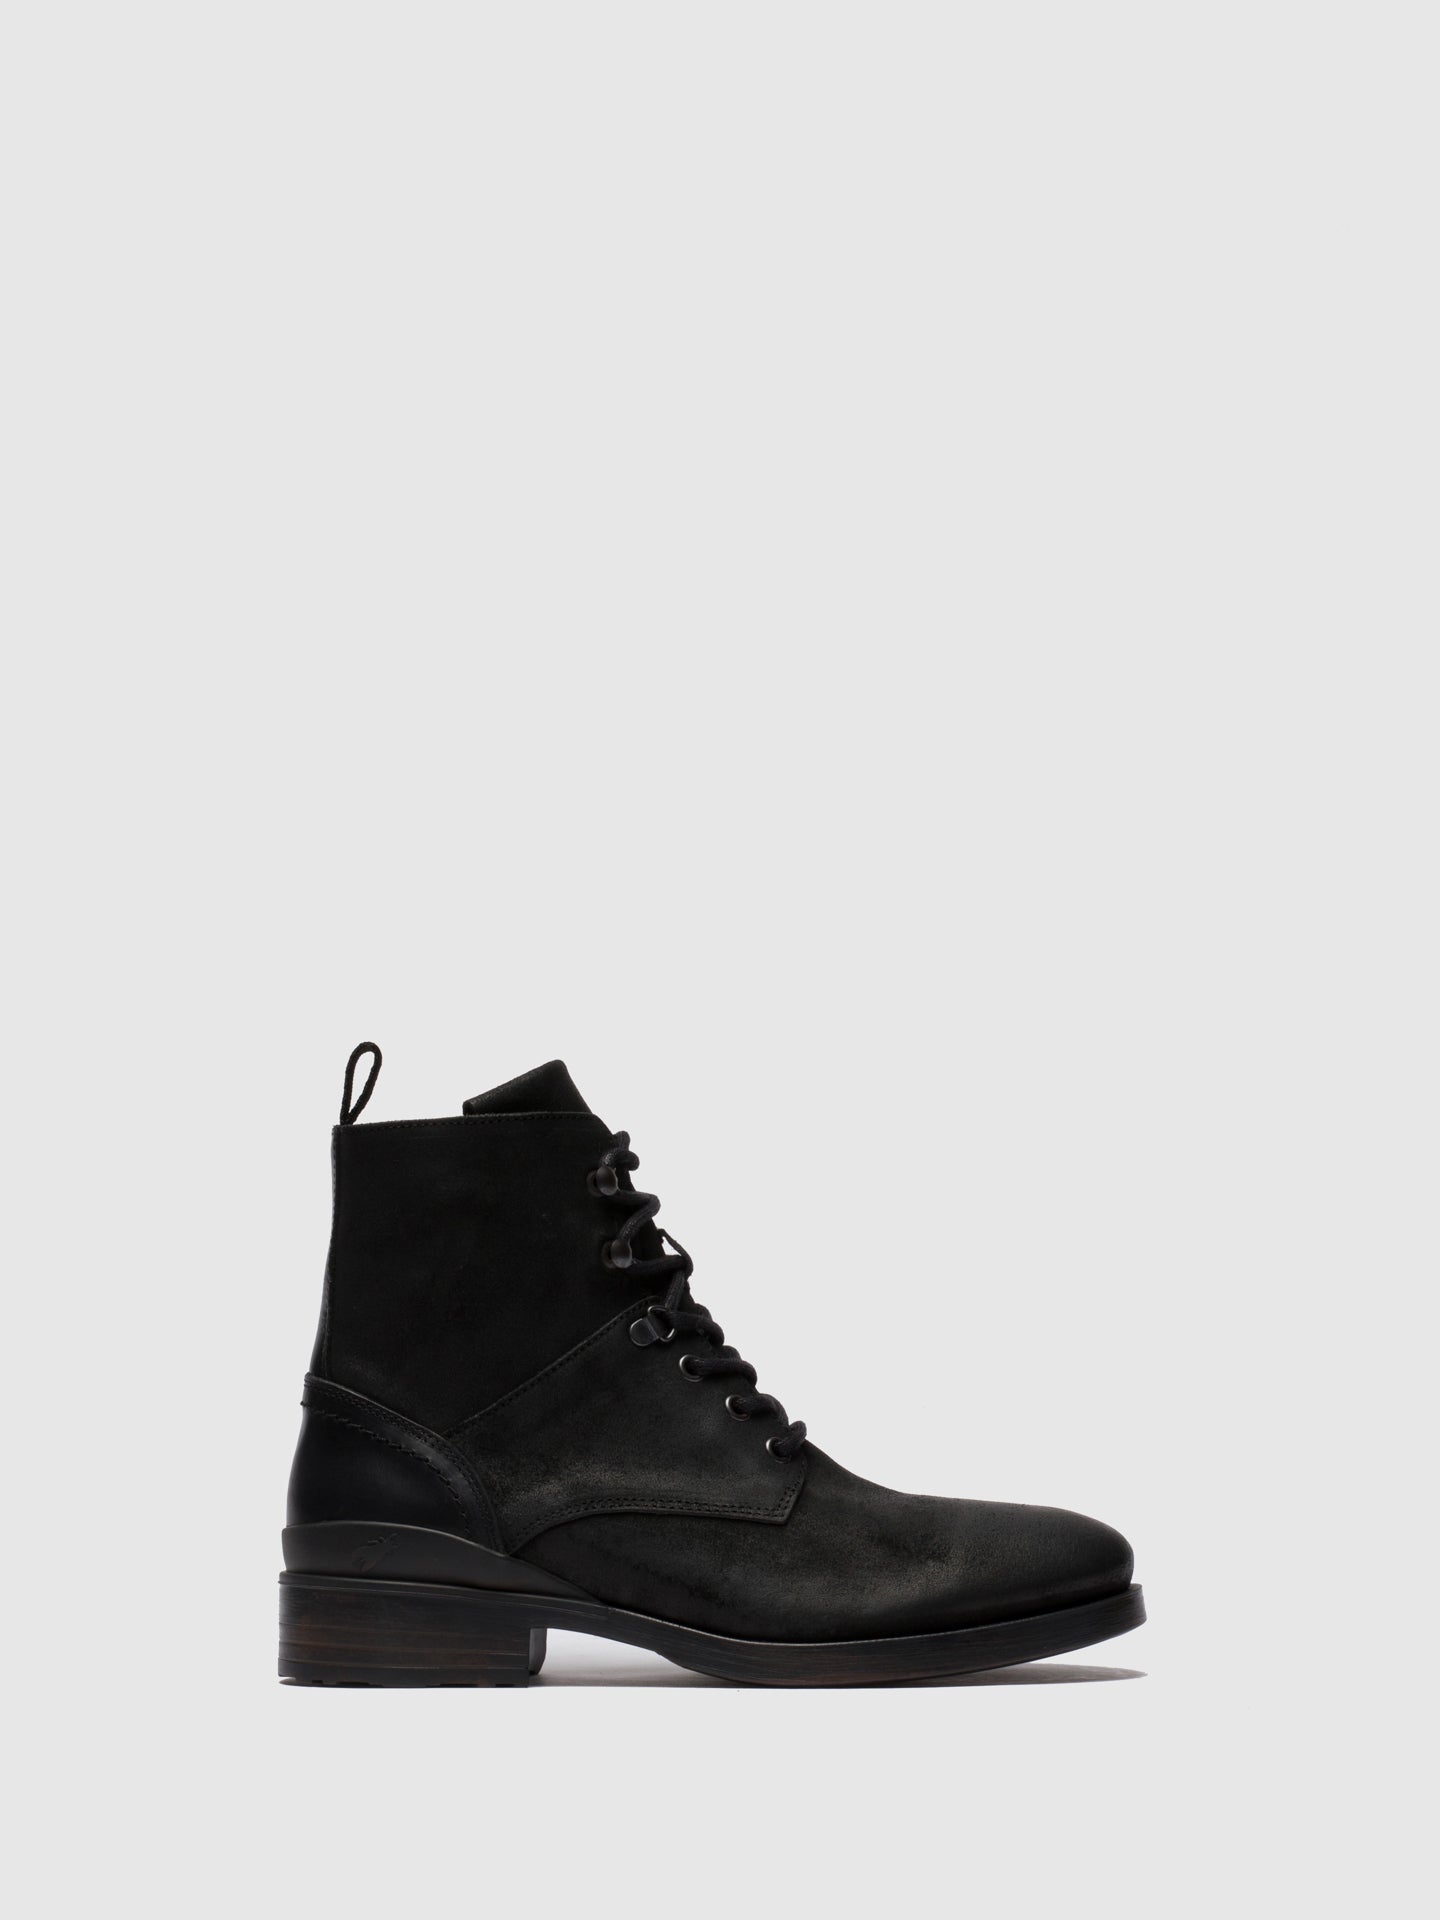 Fly London - Black Lace-up Ankle Boots - Overcube